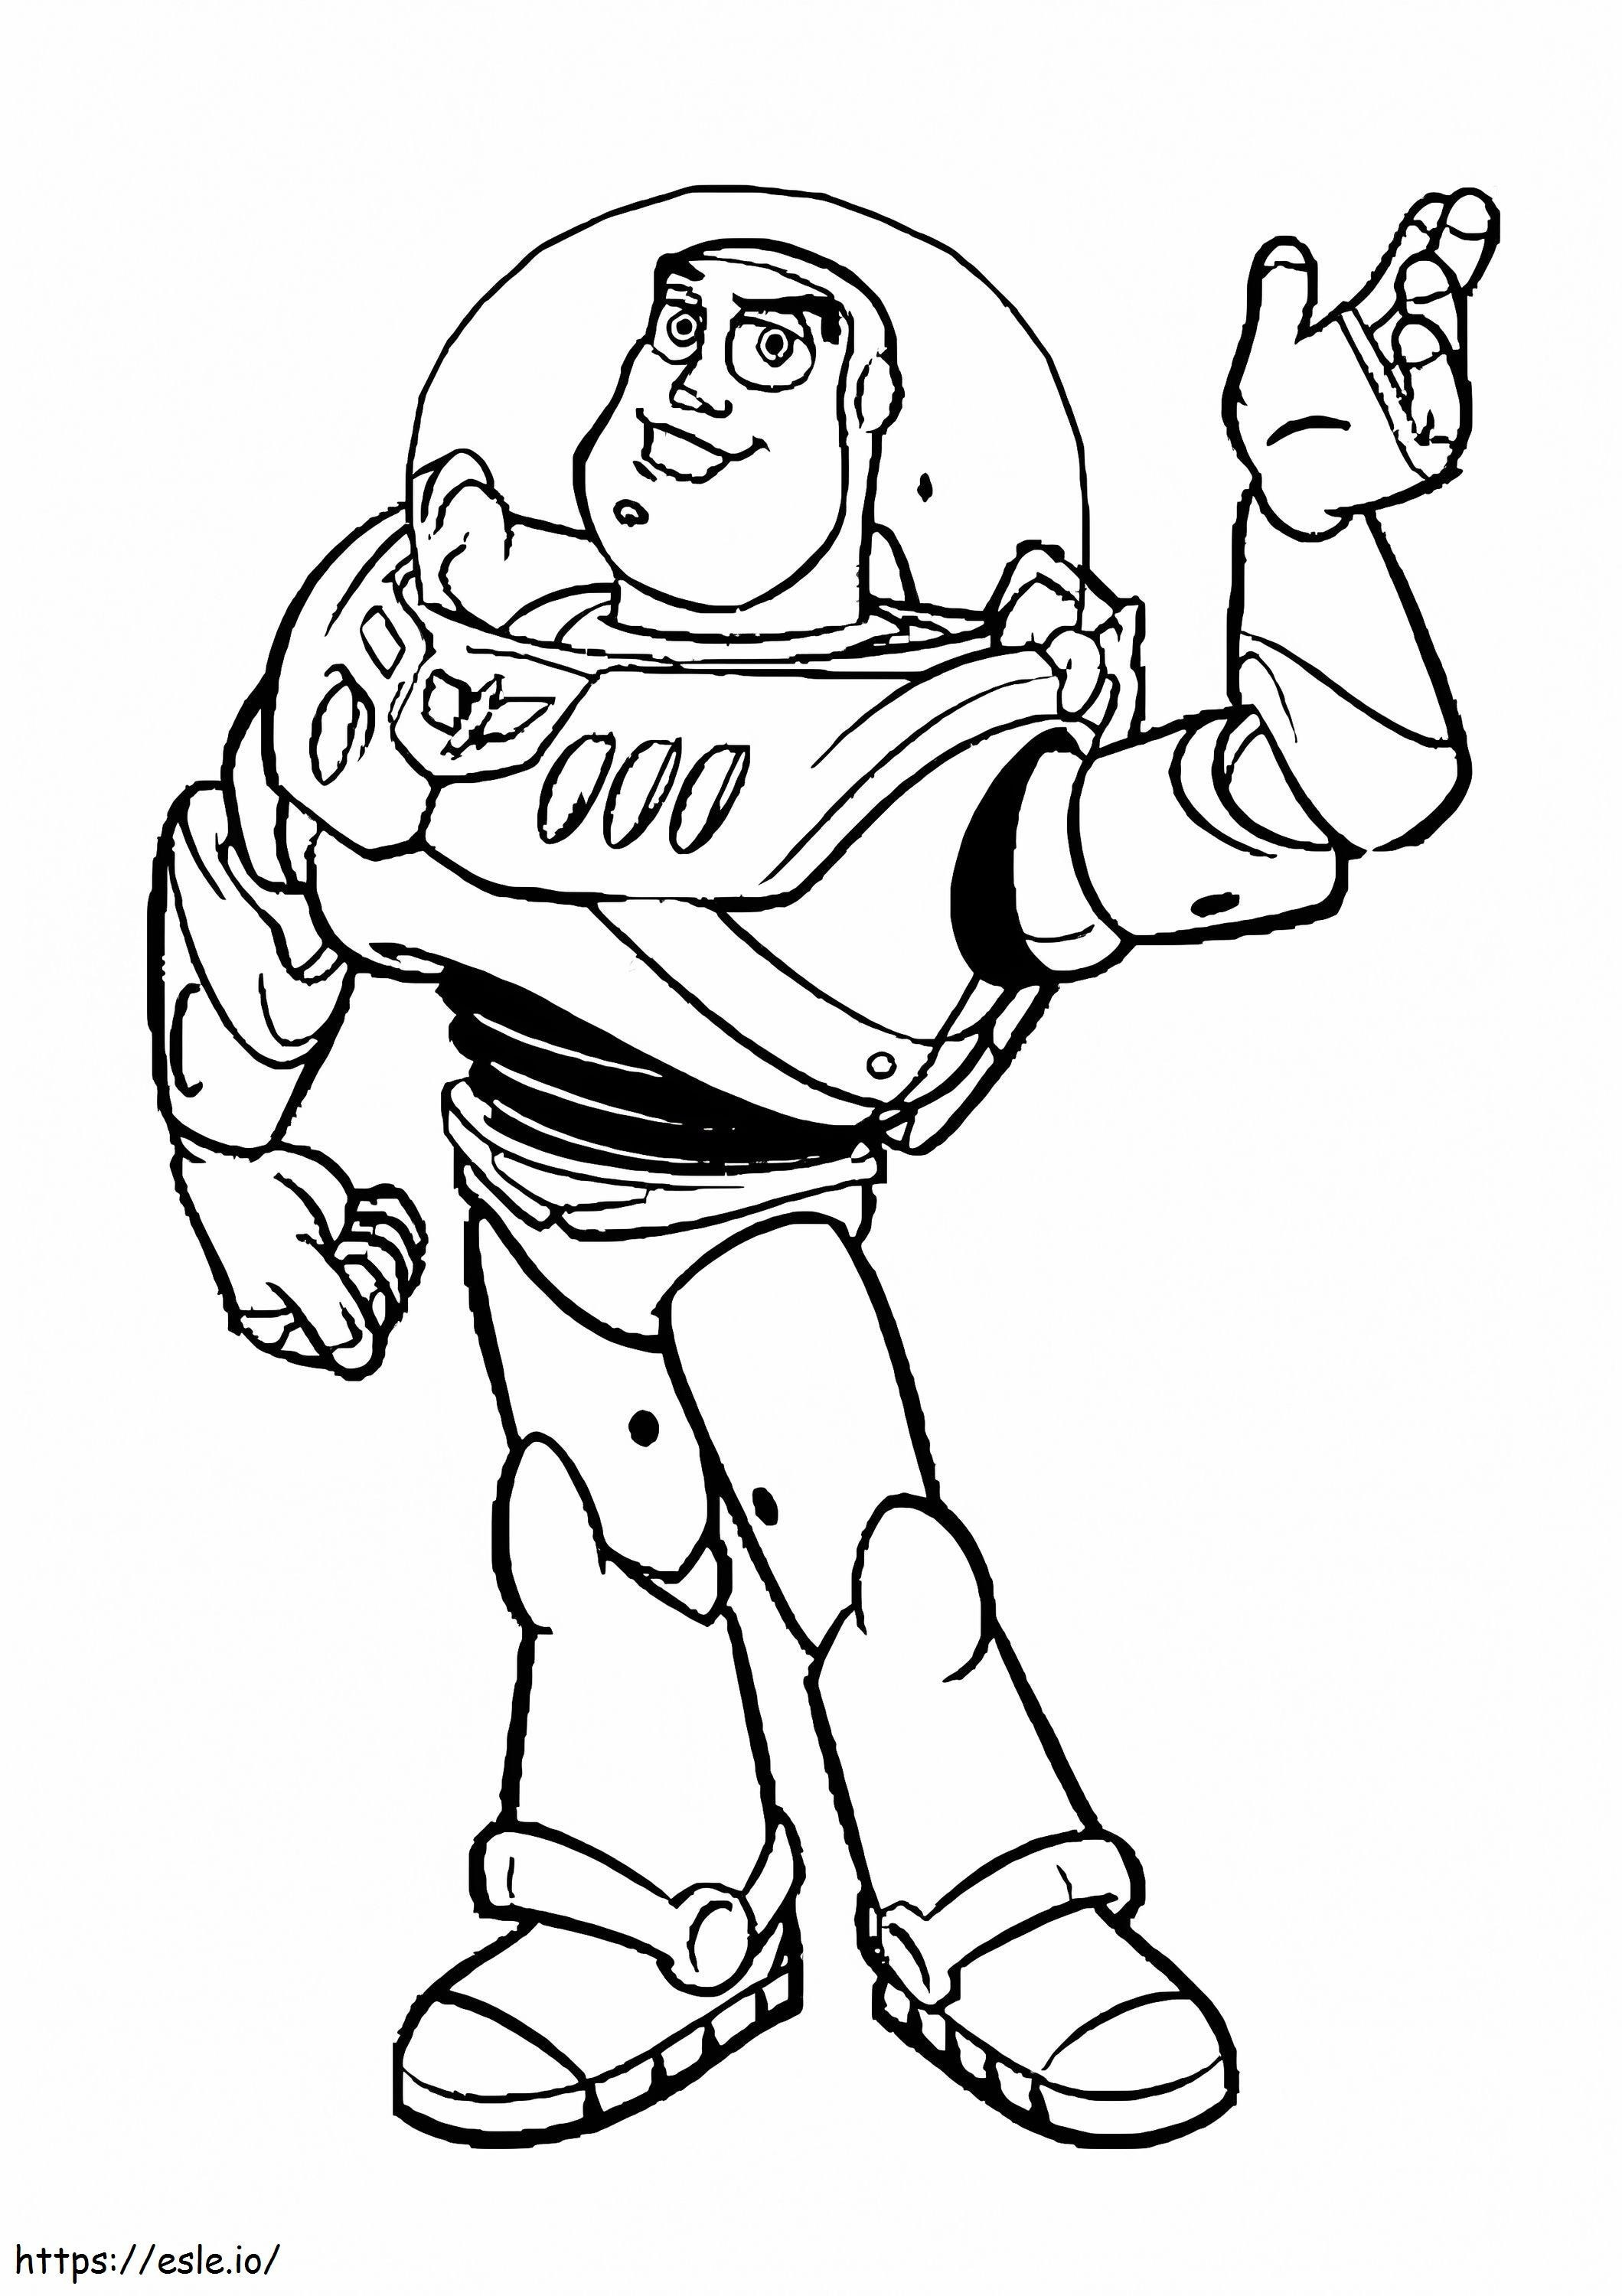 Buzz Lightyear Is Smiling coloring page